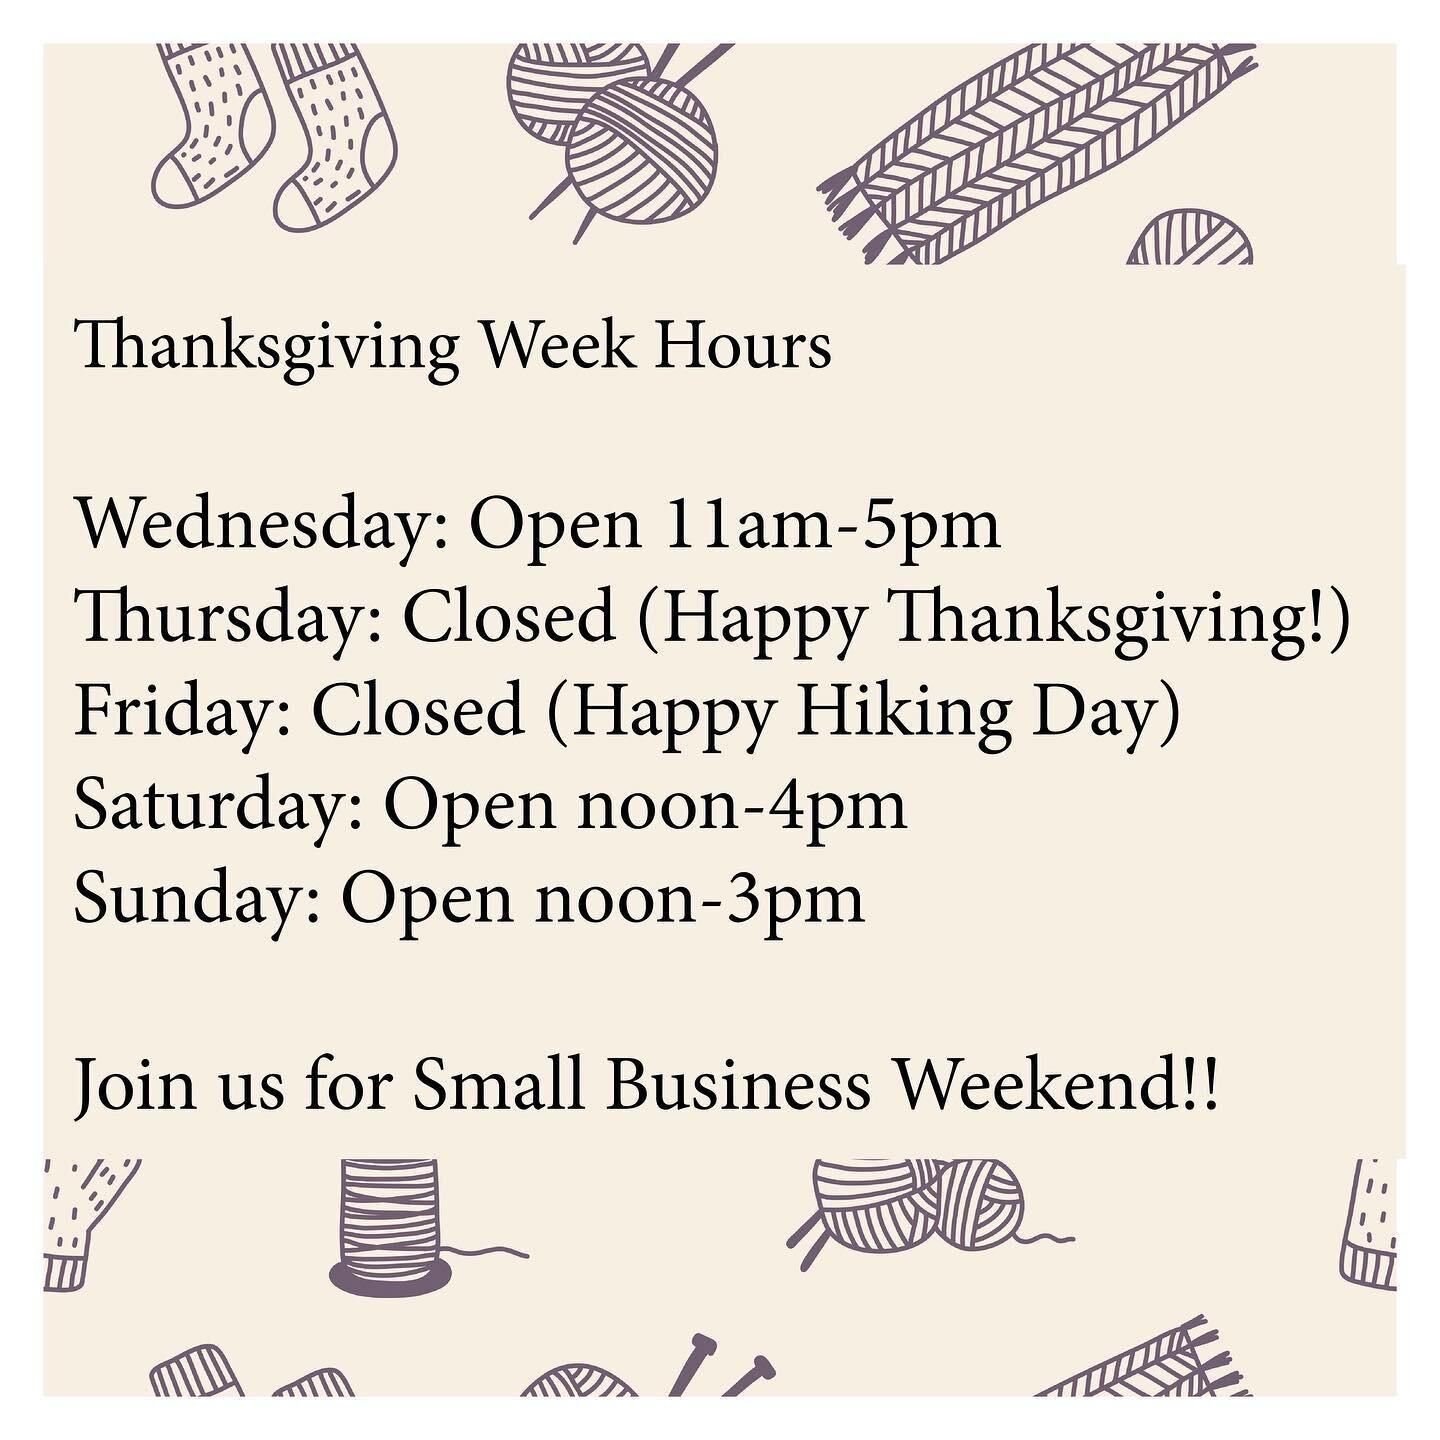 Here is our schedule for the week! Make sure and join us Saturday for Small Business Saturday. Happy Thanksgiving 🍁 everyone!